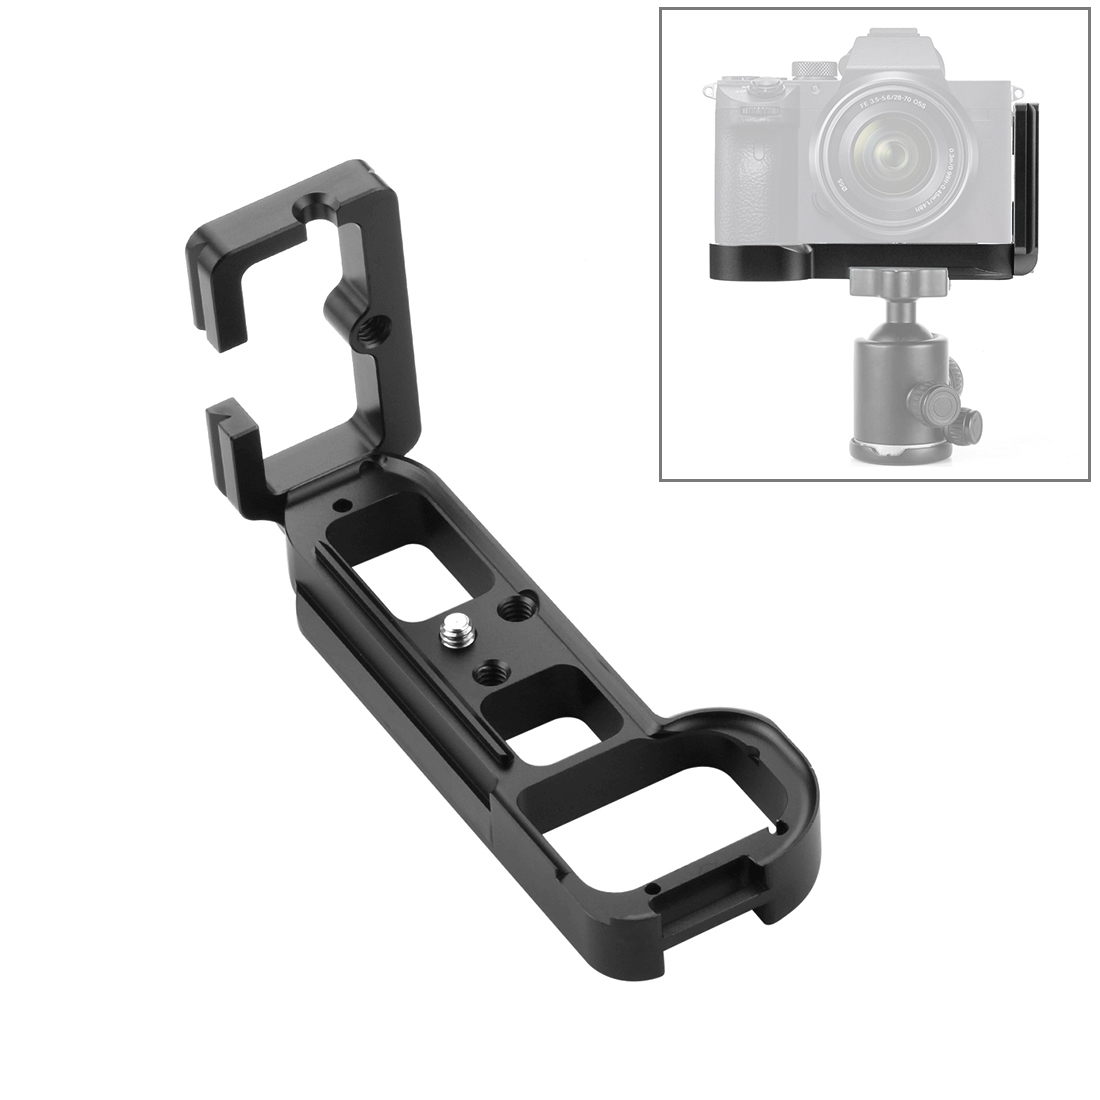 DSLR Camera L Bracket Quick Release QR Plate Compatible with Sony A7 A7R A7S Vertical Shooting Tripod Head Grip Arca-Swiss 1/4 Screw Holes